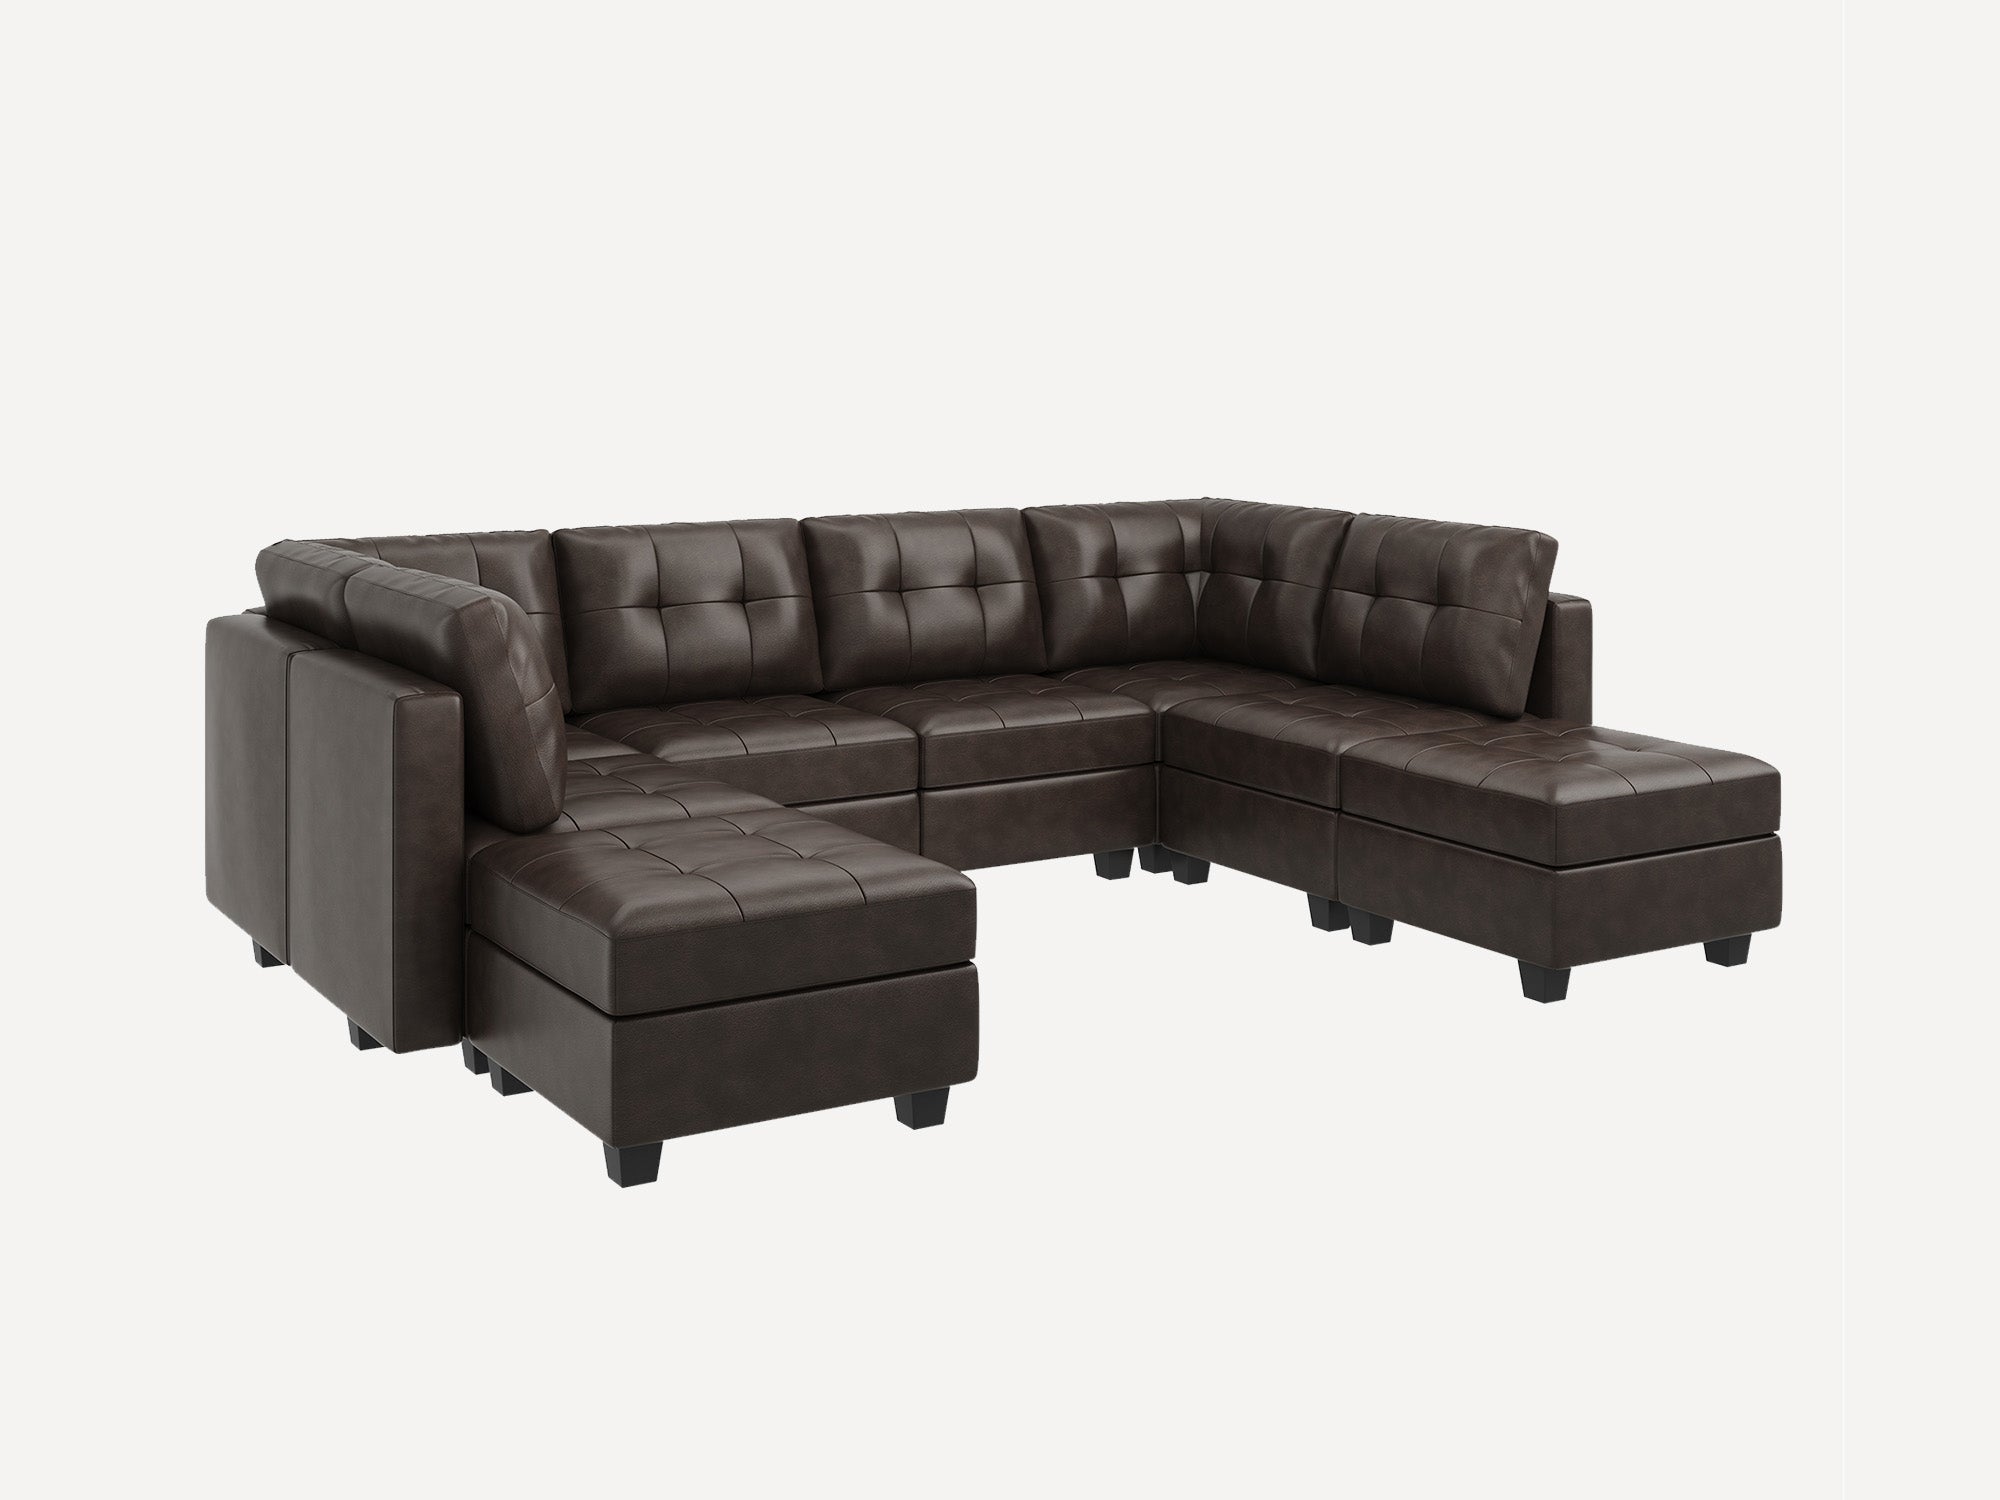 HONBAY 6-Piece Faux Leather Modular Sectional With Storage Seat